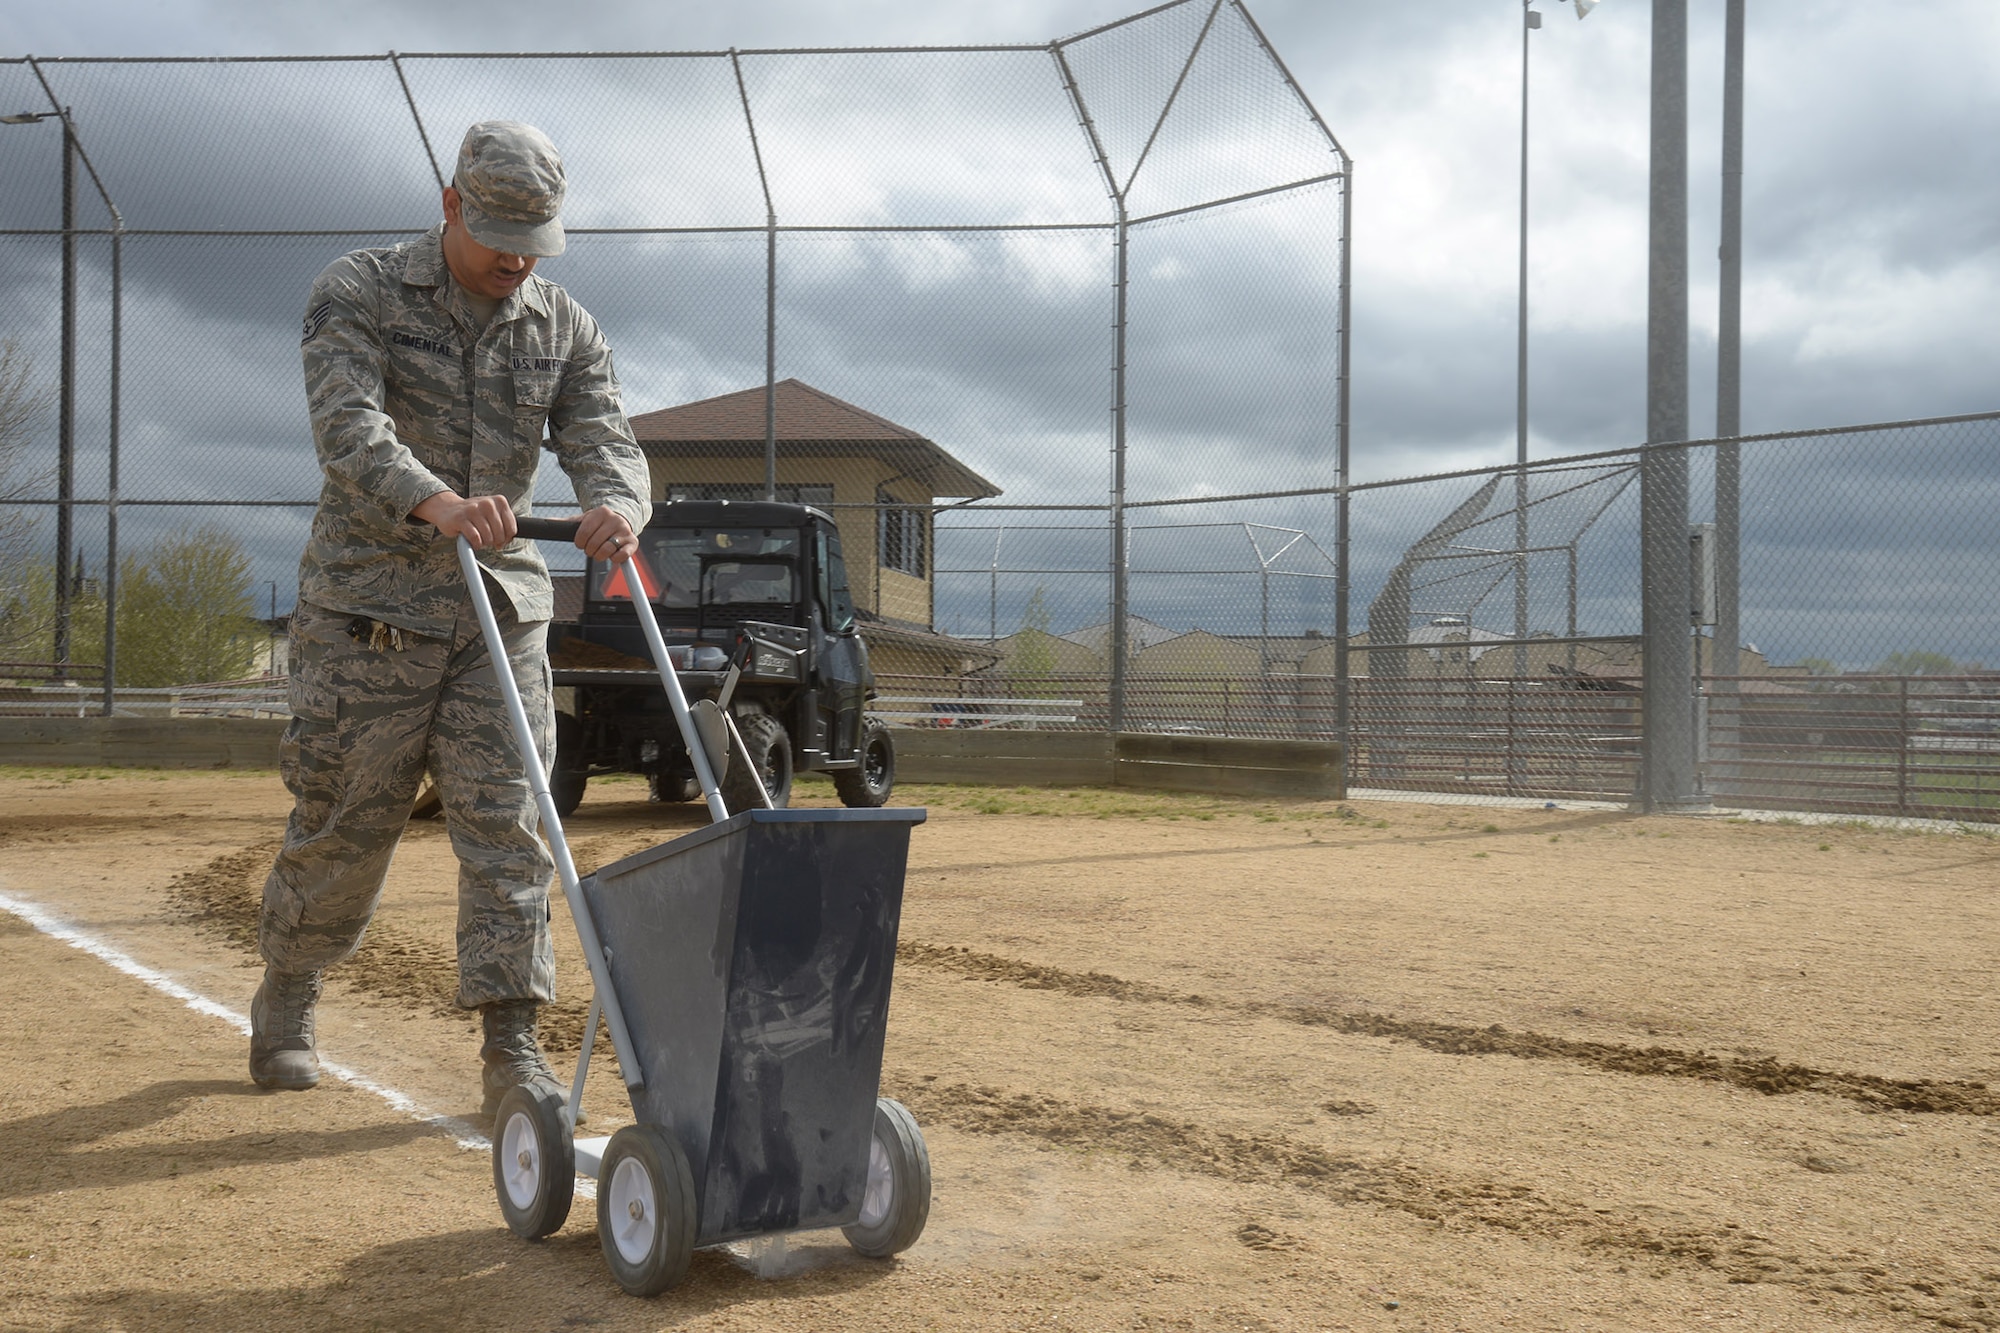 Staff Sgt. Juan Cimental, 341st Force Support Squadron sports program manager, lays down chalk markers on a softball field May 20, 2019, at Malmstrom Air Force Base, Mont.